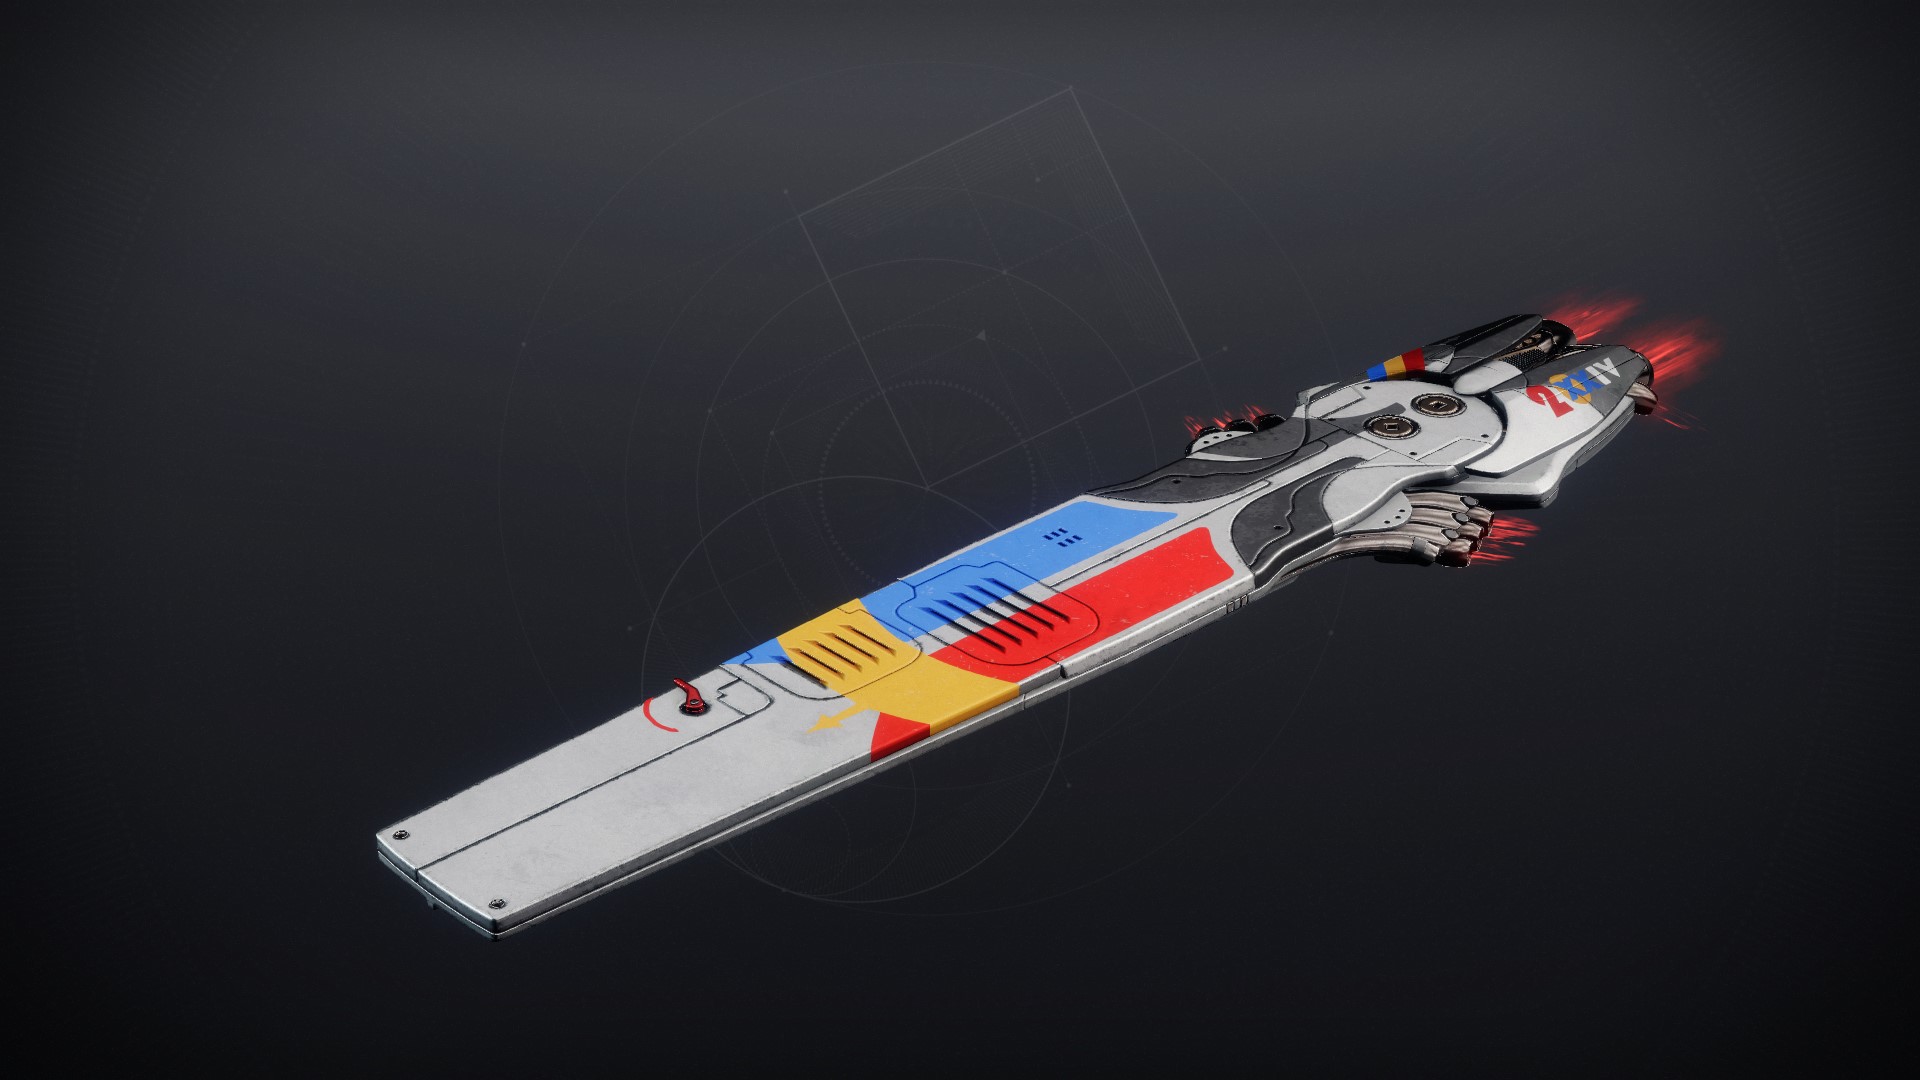 An in-game render of the Allstar Vector.